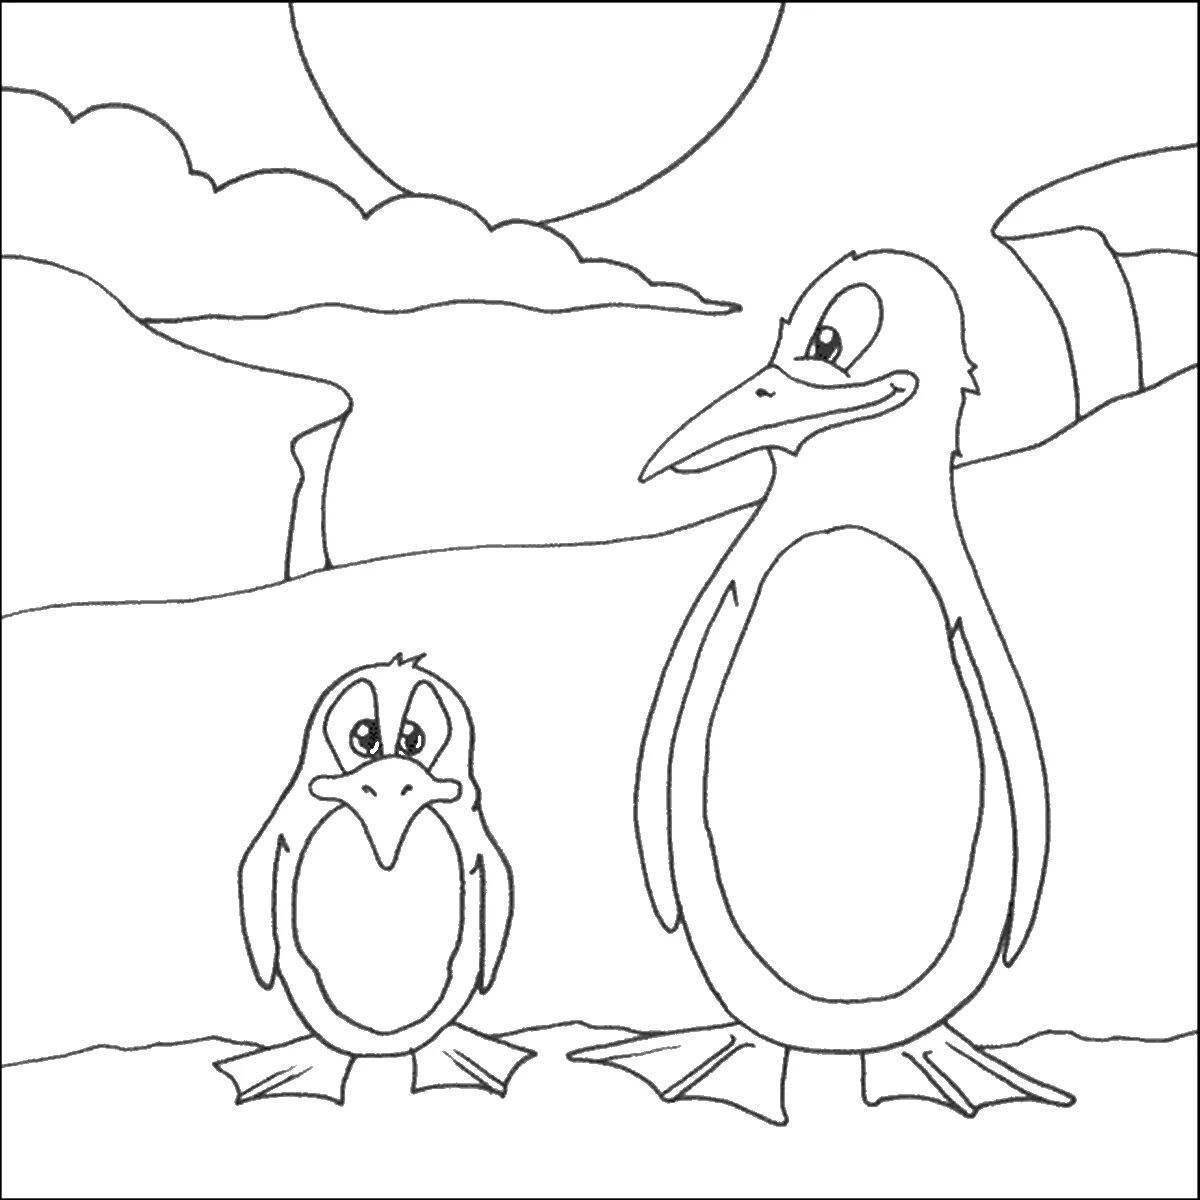 Colorful penguin family coloring page